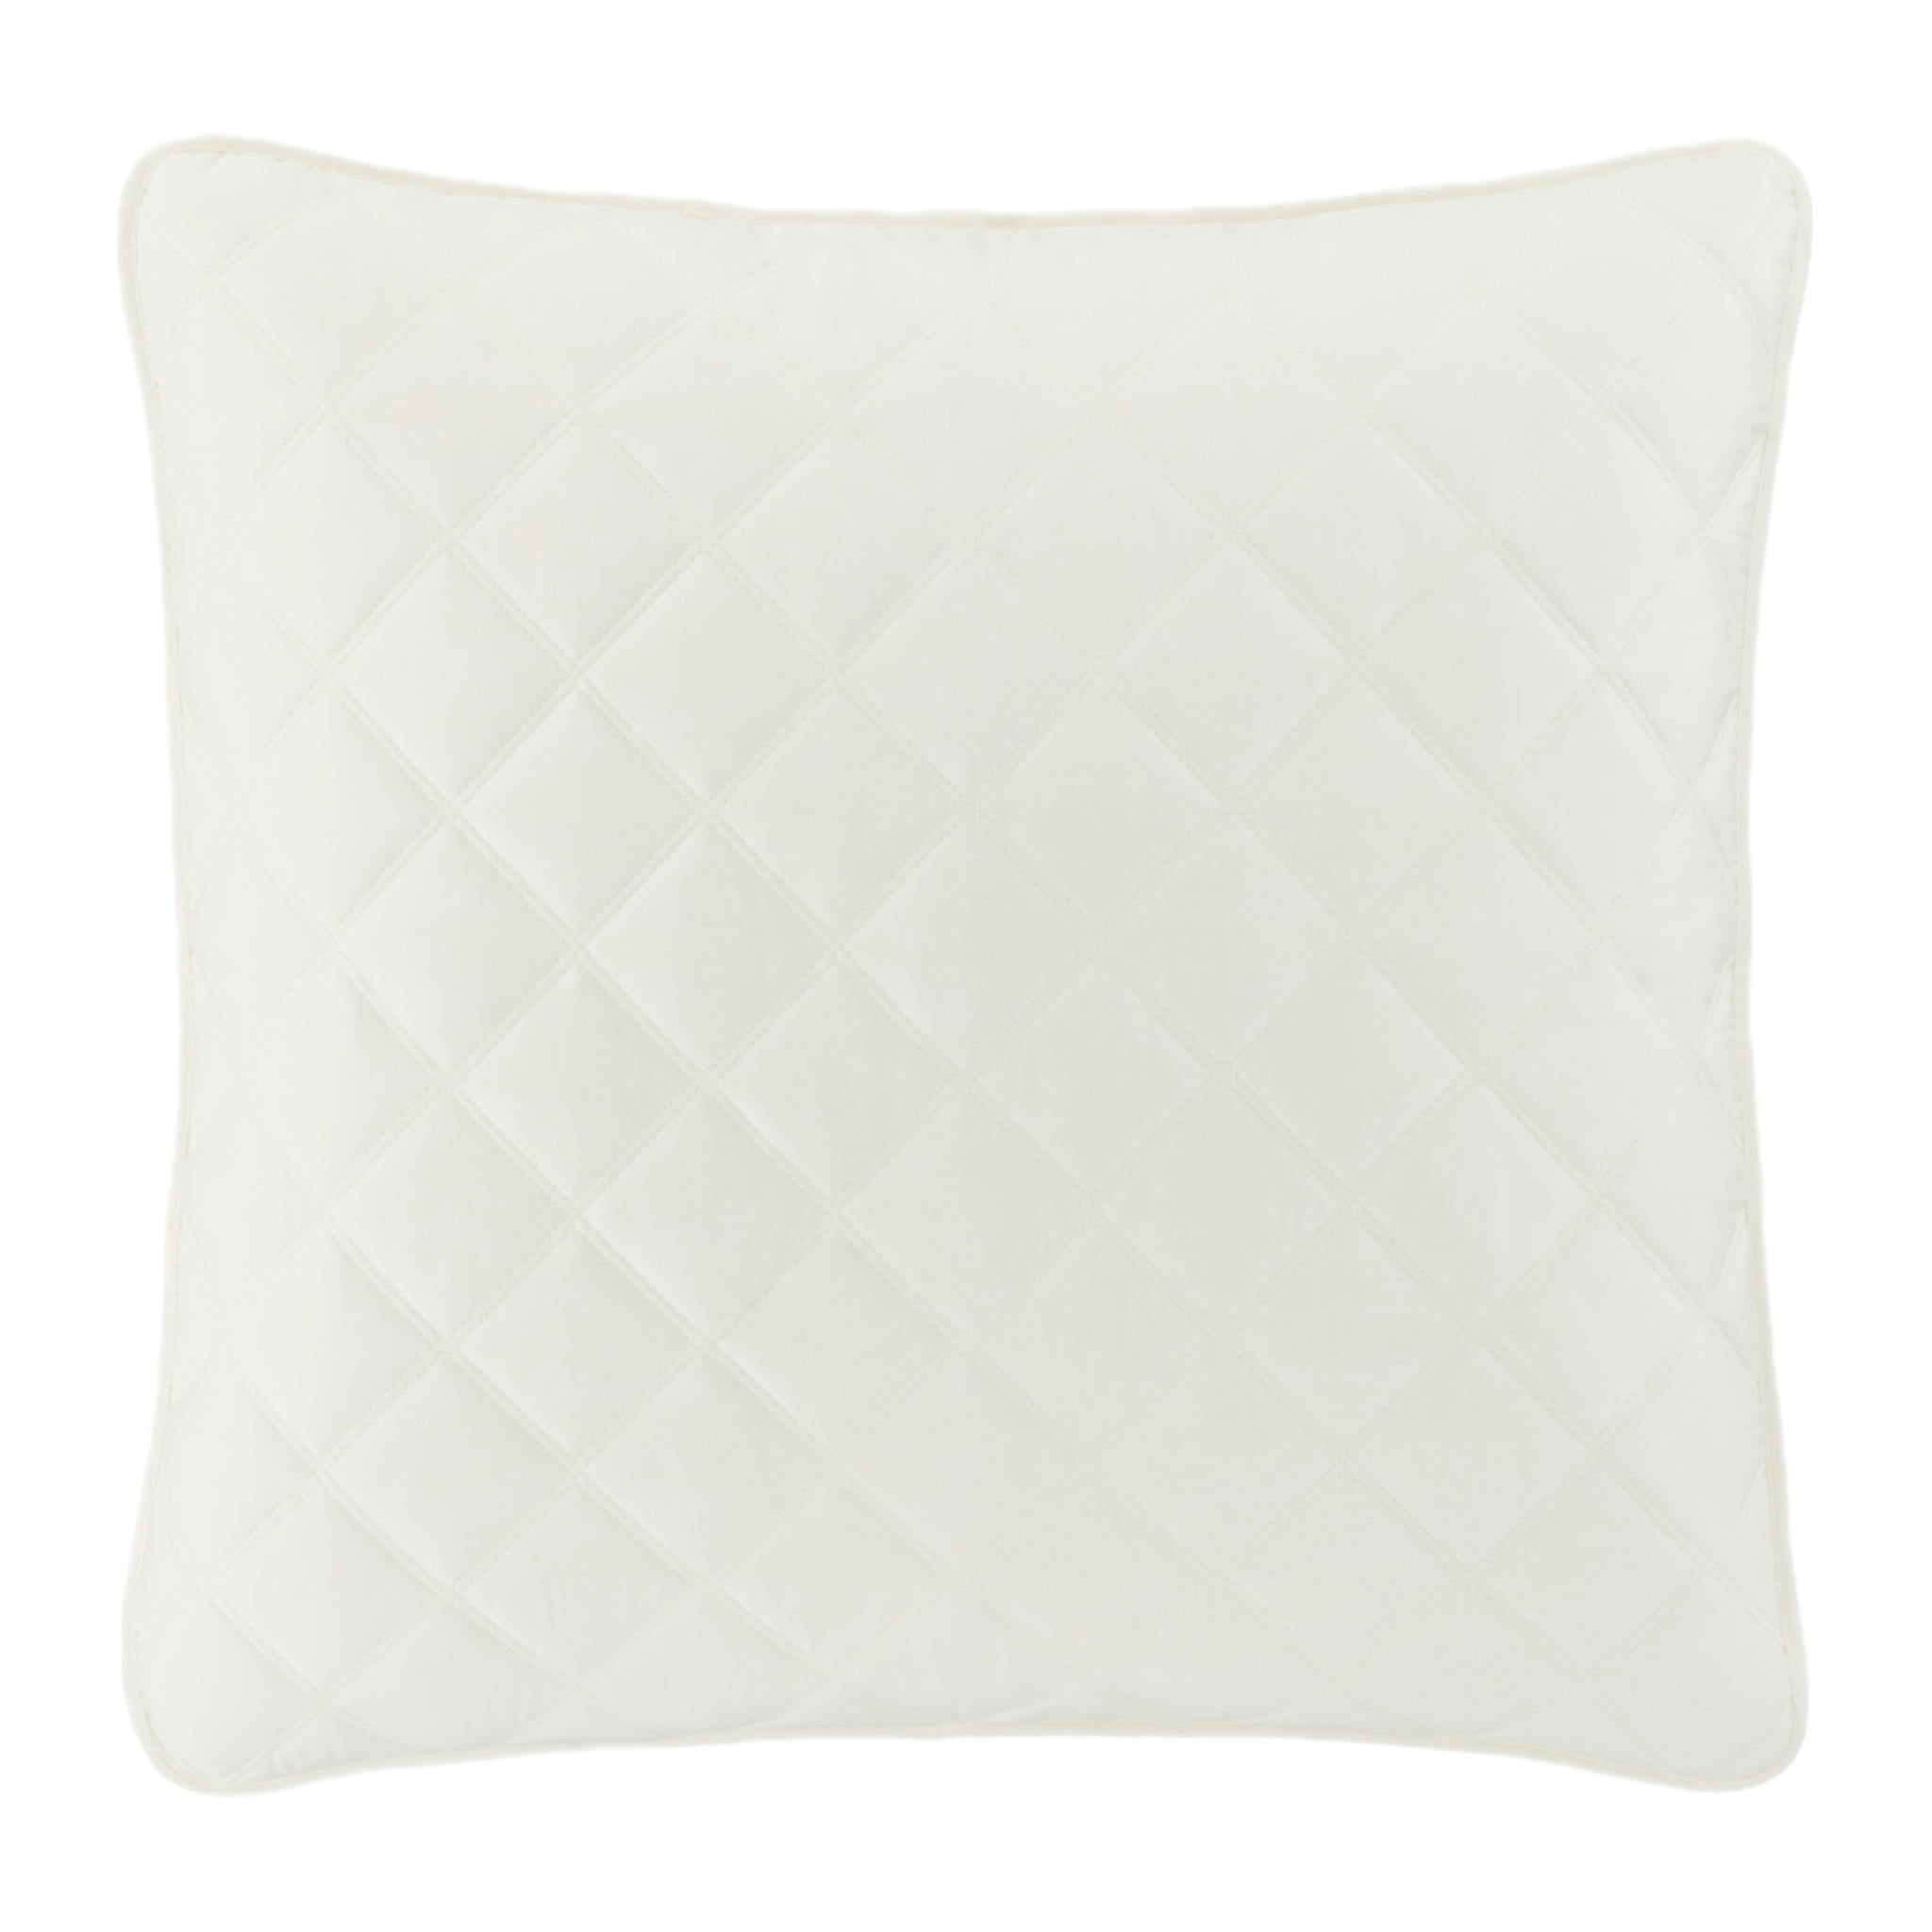 Quilted Silken Solid Euro Sham - White, Pine Cone Hill